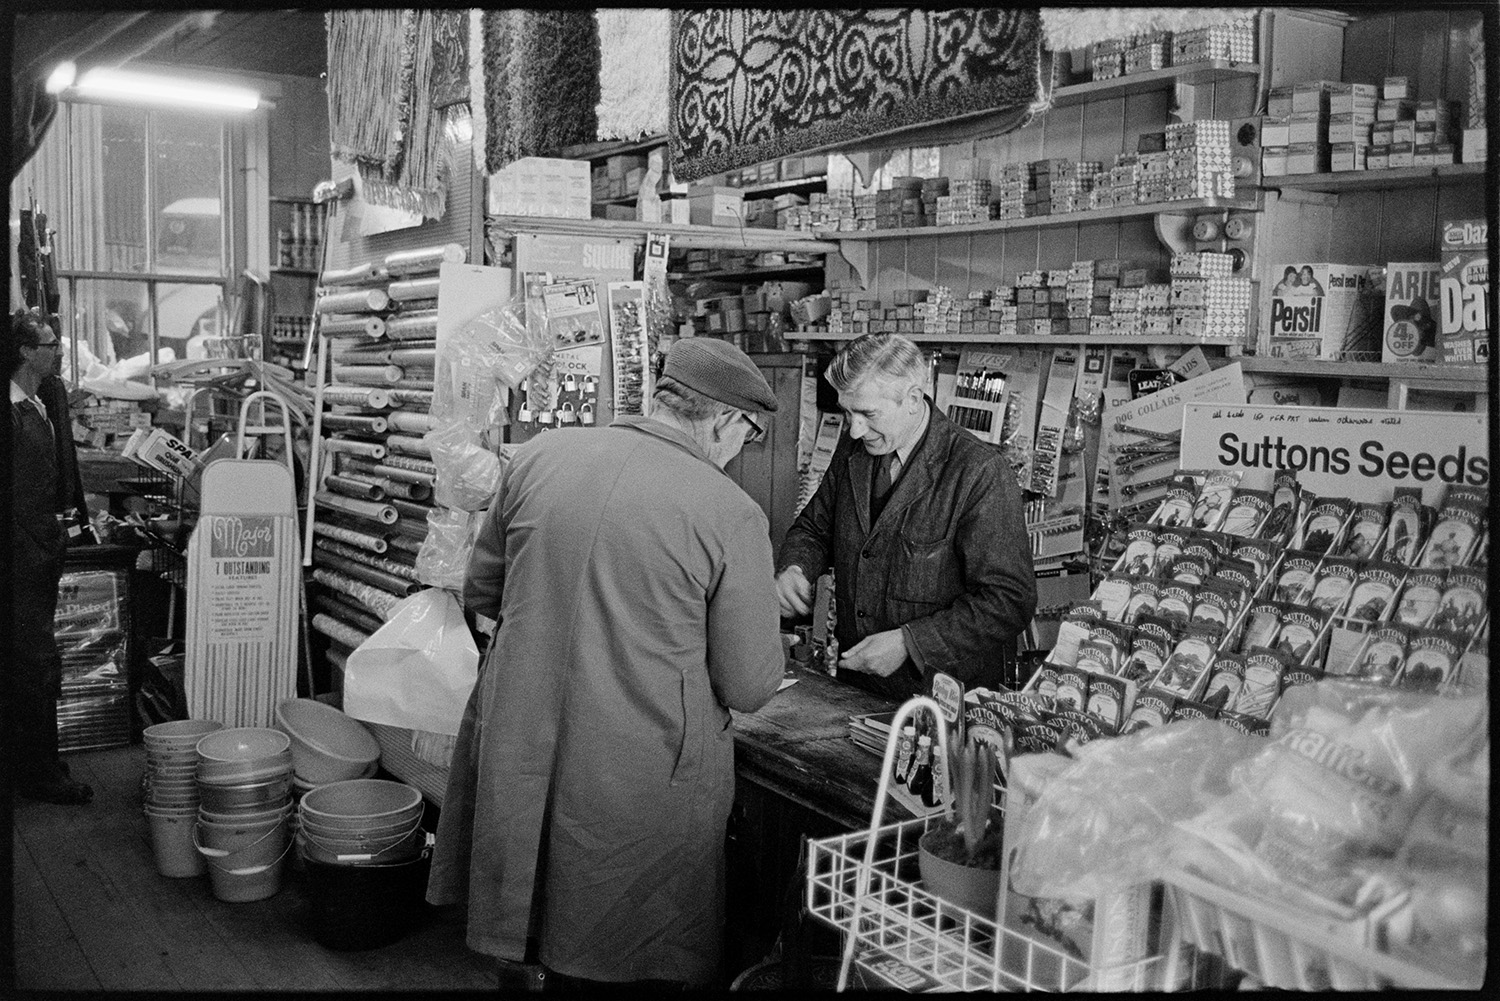 Interior of hardware store with proprietors and customers. 
[The interior of Ellacotts hardware shop in Market Street Hatherleigh. Jim Hockin is serving a customer. Various goods, including Sutton's seeds, buckets and rugs, can be seen in the shop.]